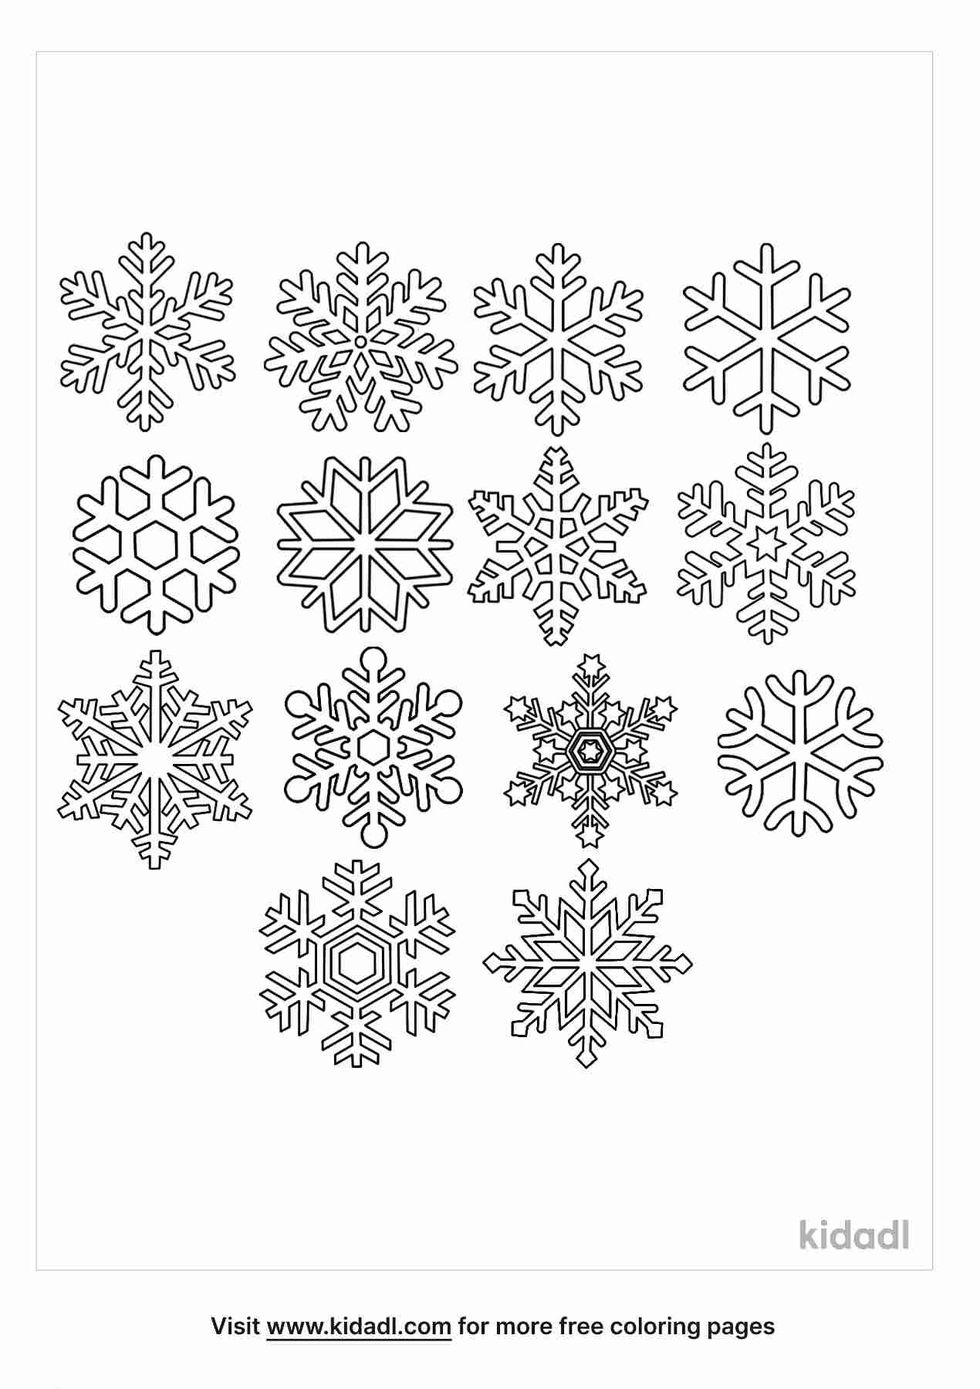 interesting facts about 14 Snowflakes